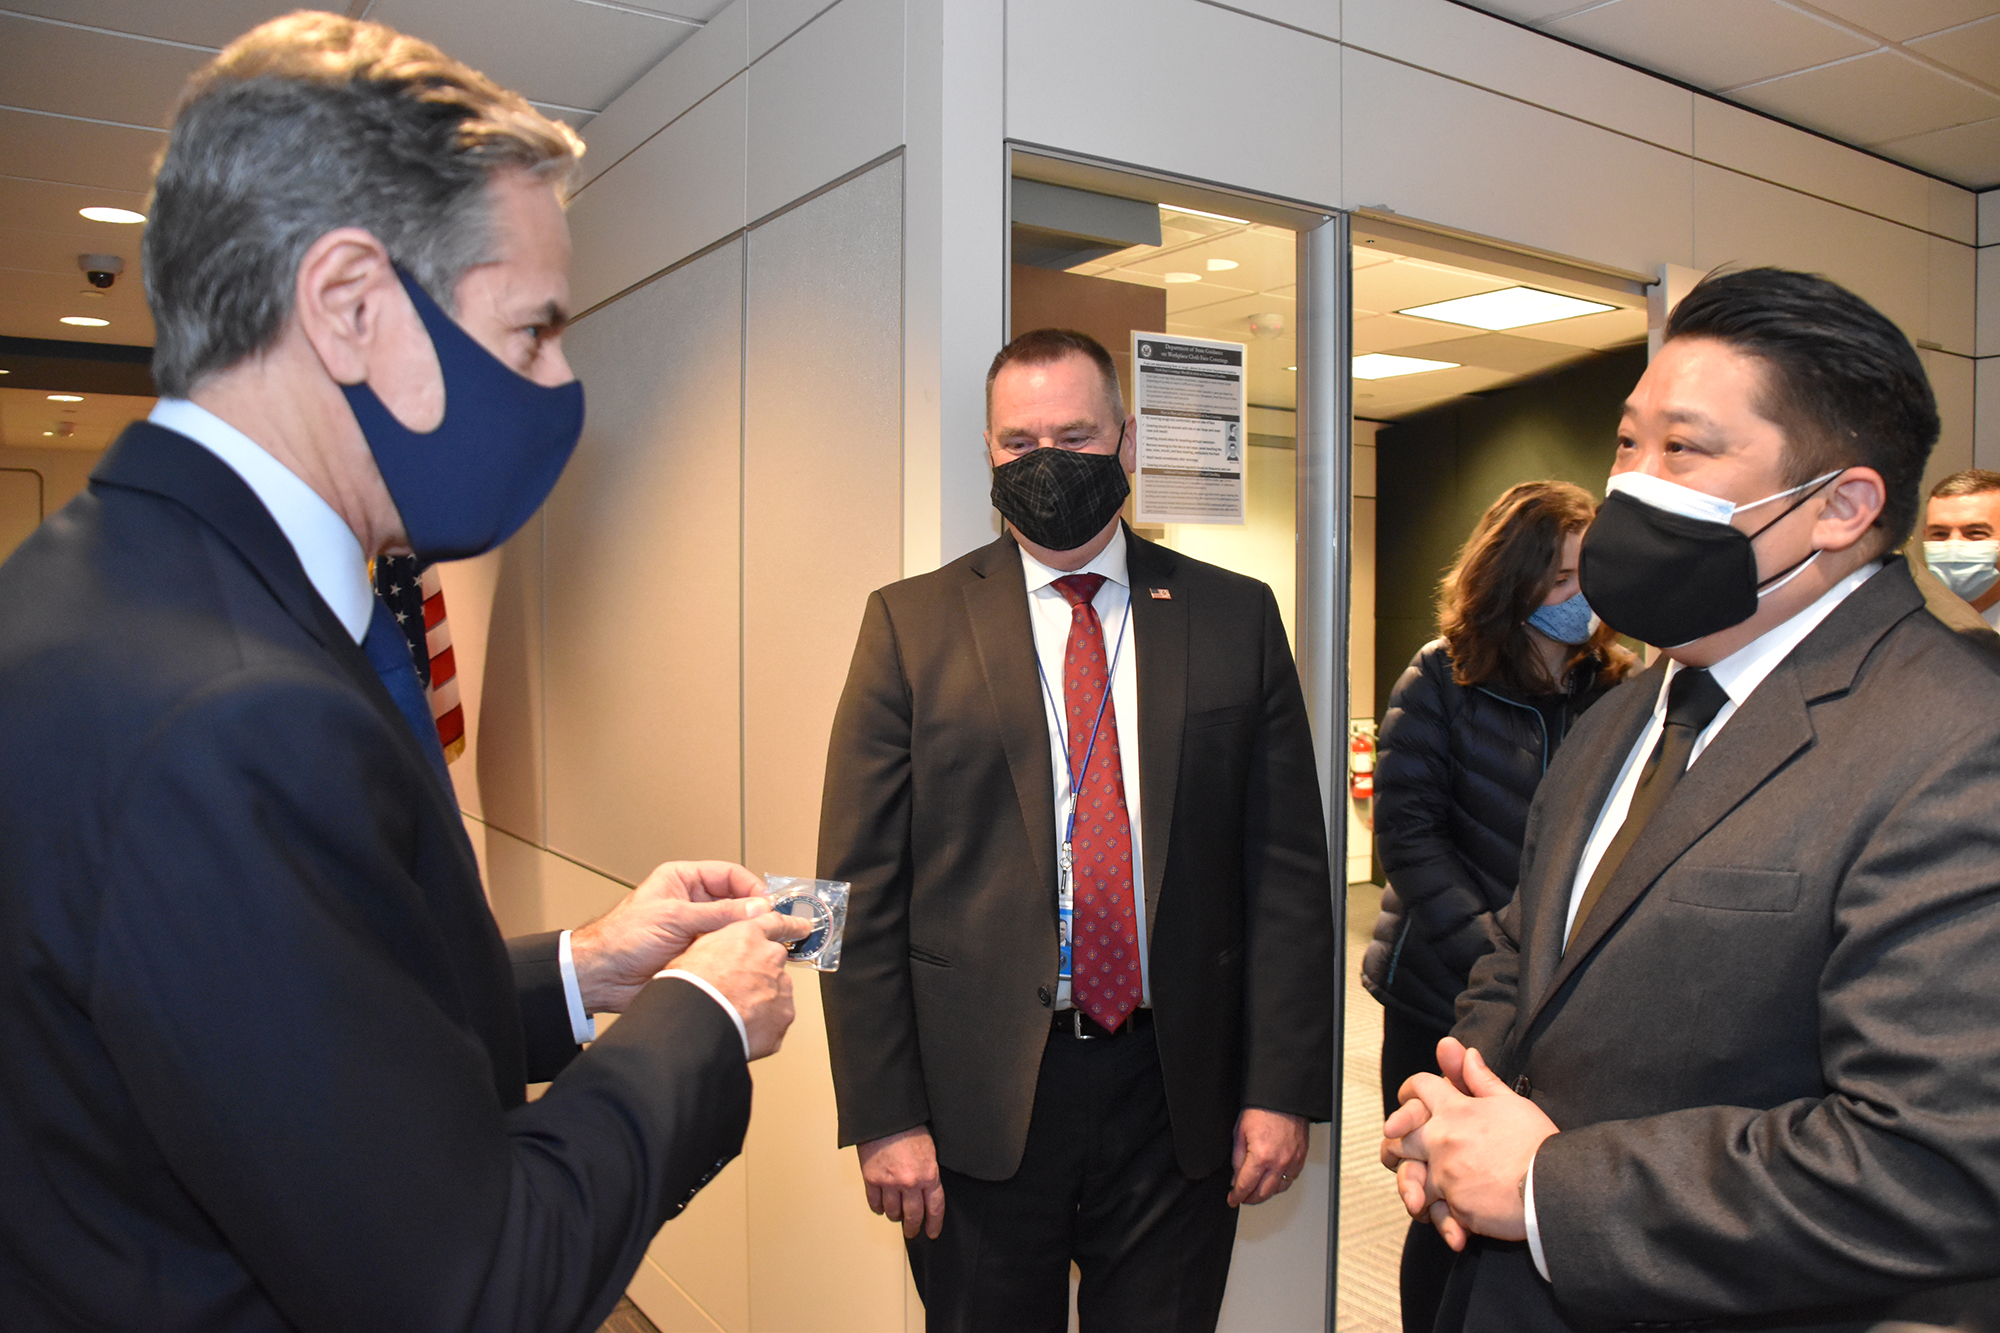 DSSCC Director Scott Kim (far right) gives a DSS coin to Secretary of State Antony J. Blinken (far left) as Acting Assistant Secretary of State for the Bureau of Diplomatic Security Todd J. Brown (center) looks on, Arlington, Va., February 21, 2021. (U.S. Department of State photo)